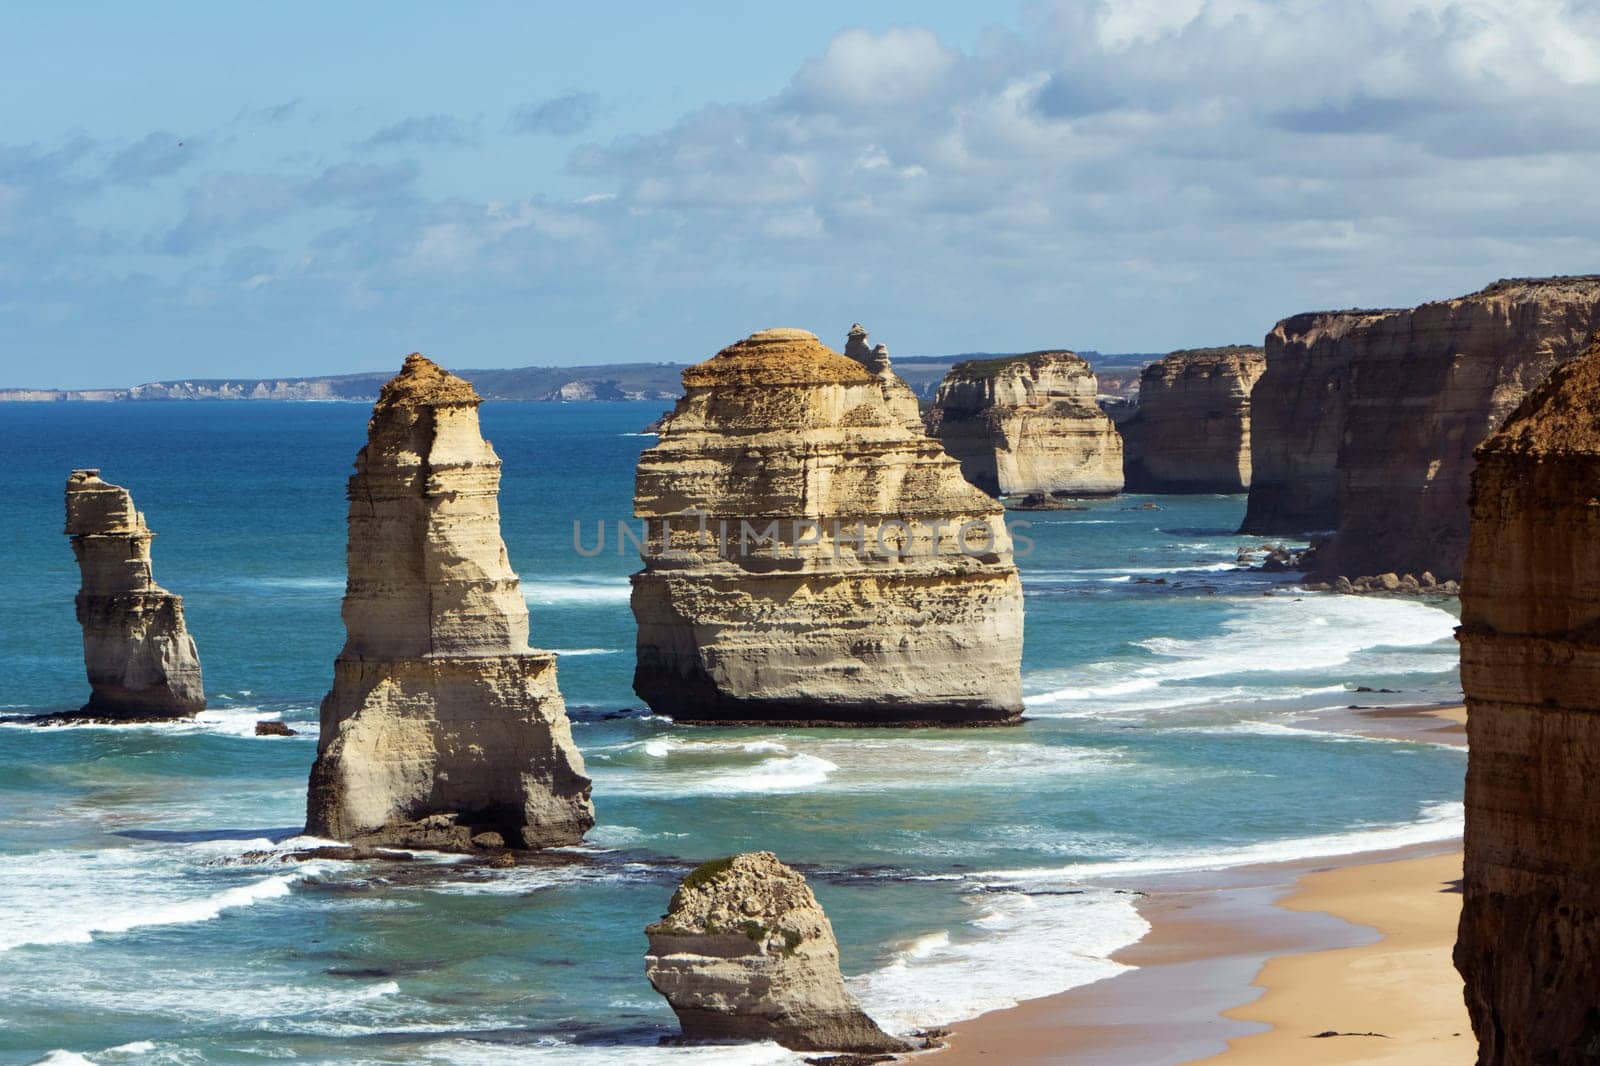 Amazing 12 apostles photo from the Great Ocean Road, Victoria, Australia. Beautiful stone cliff structures in the ocean